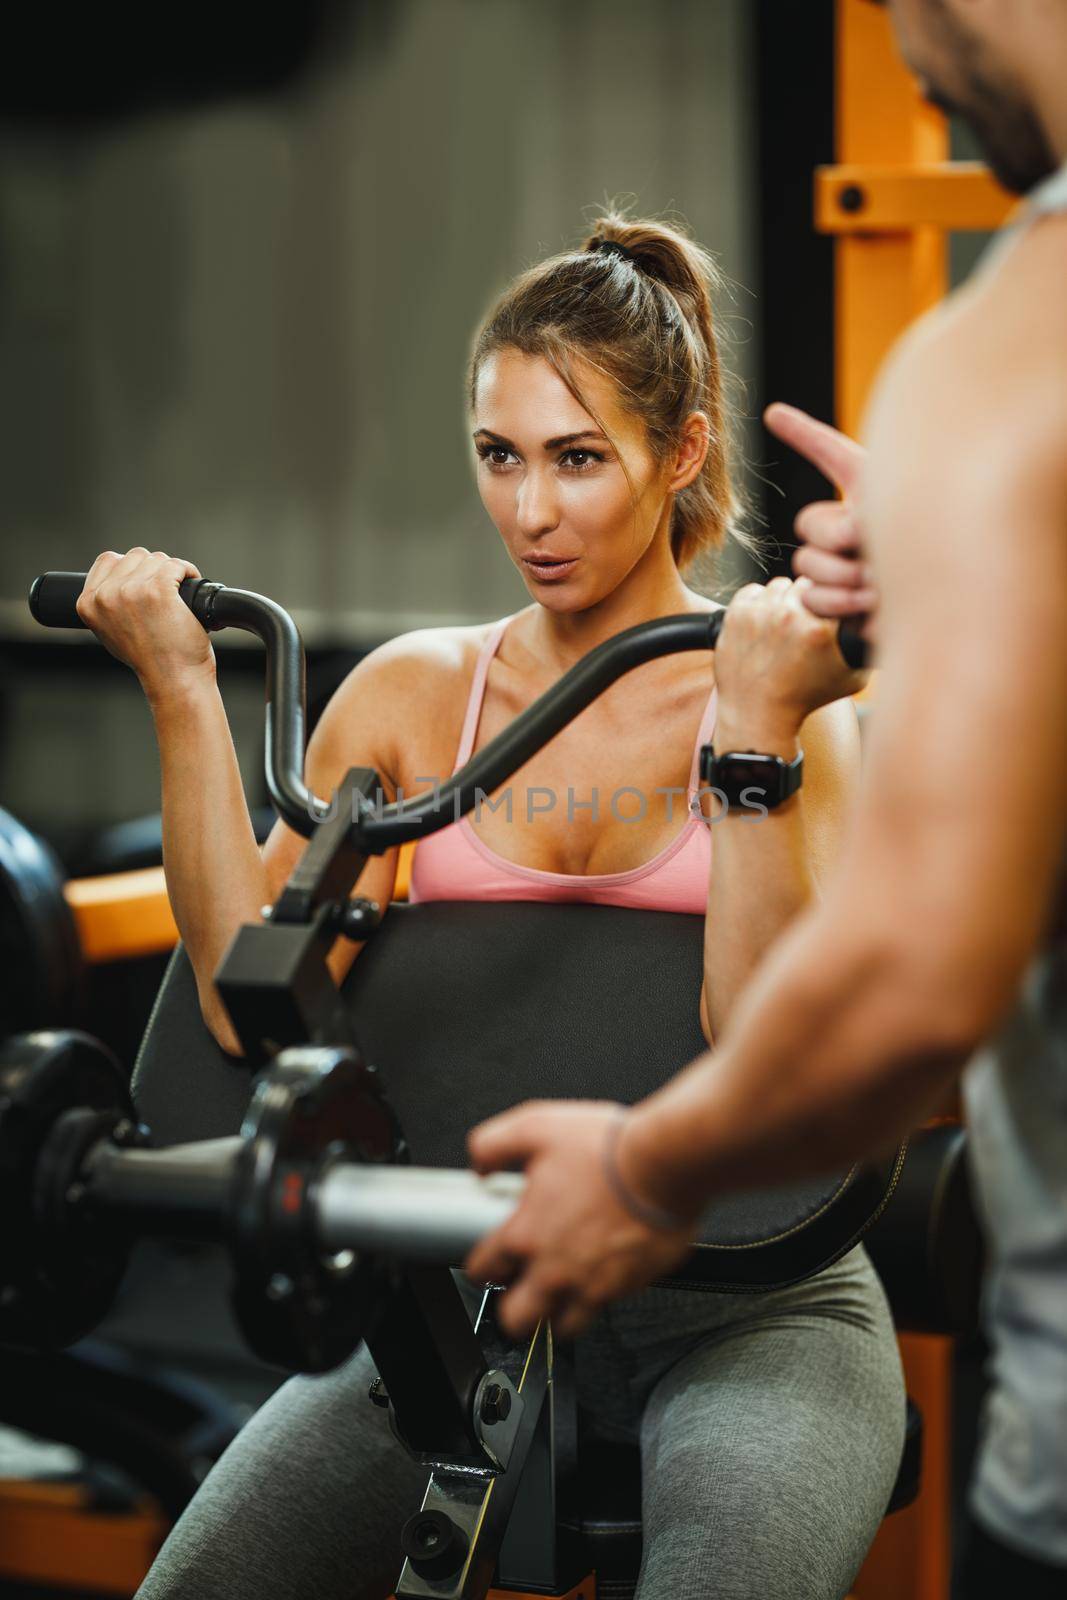 An attractive young woman working out with personal trainer at the cross training gym.